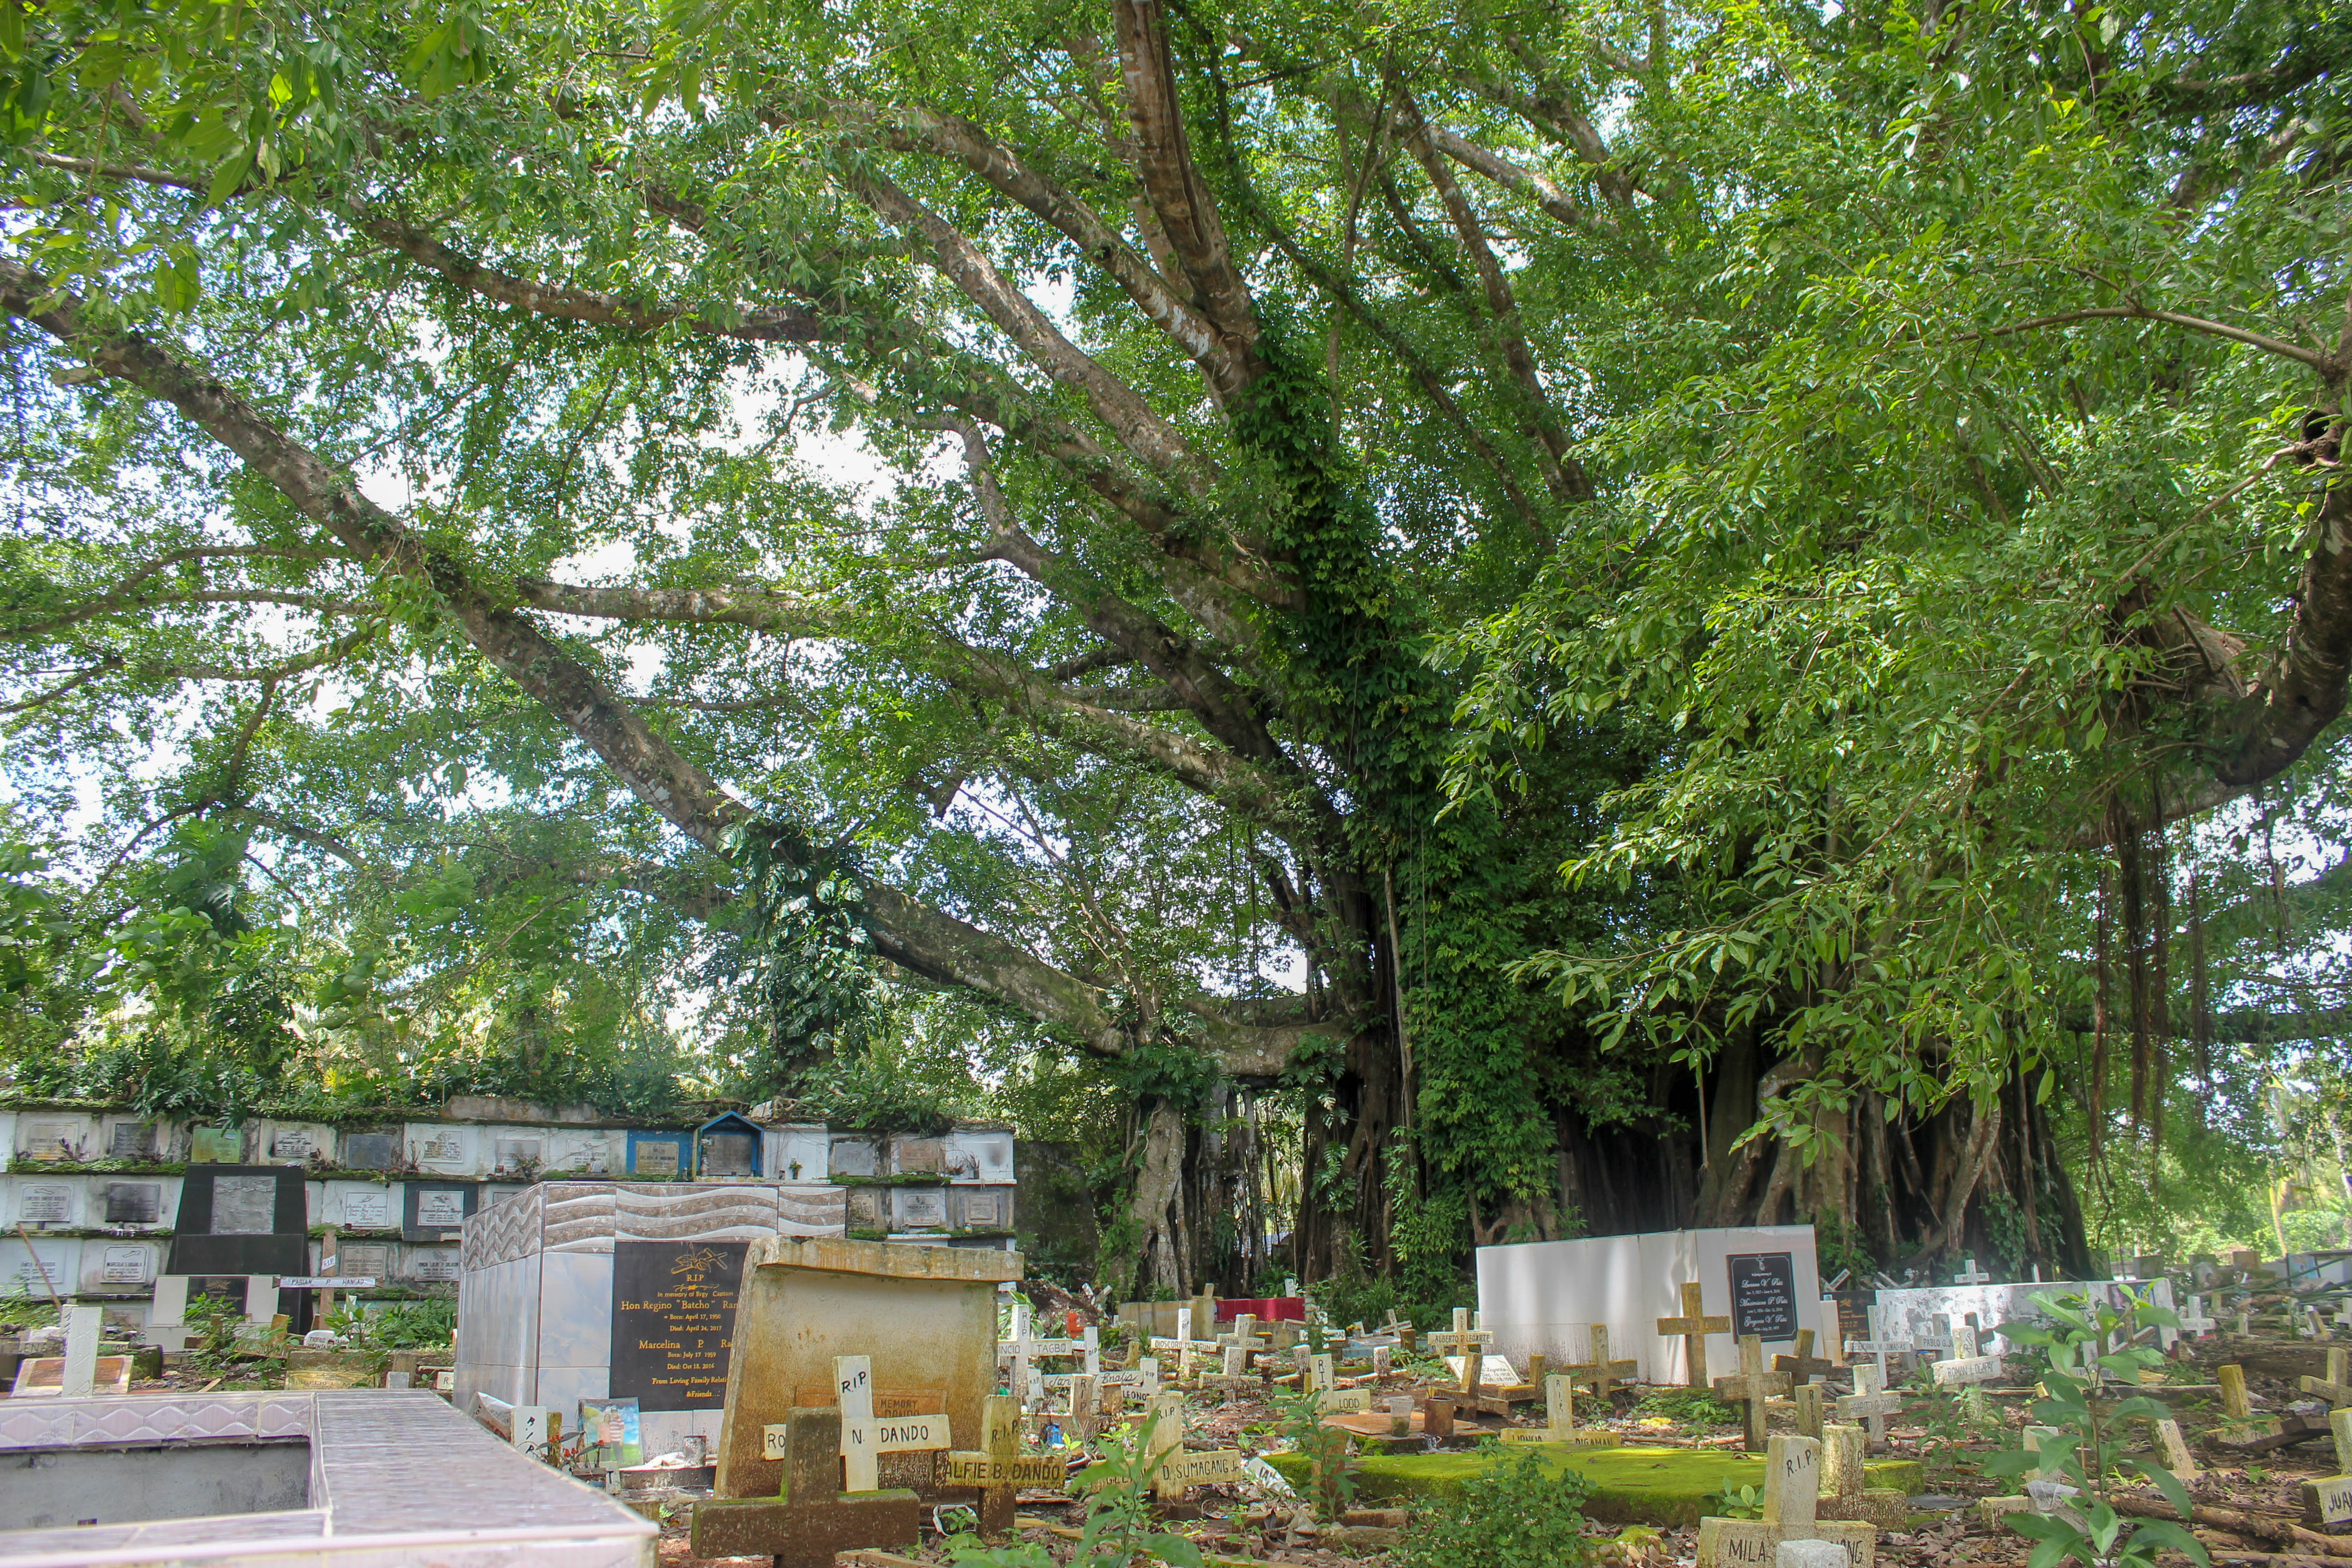 The huge Balete Tree in the middle of the Jimenez Catholic Cemetery